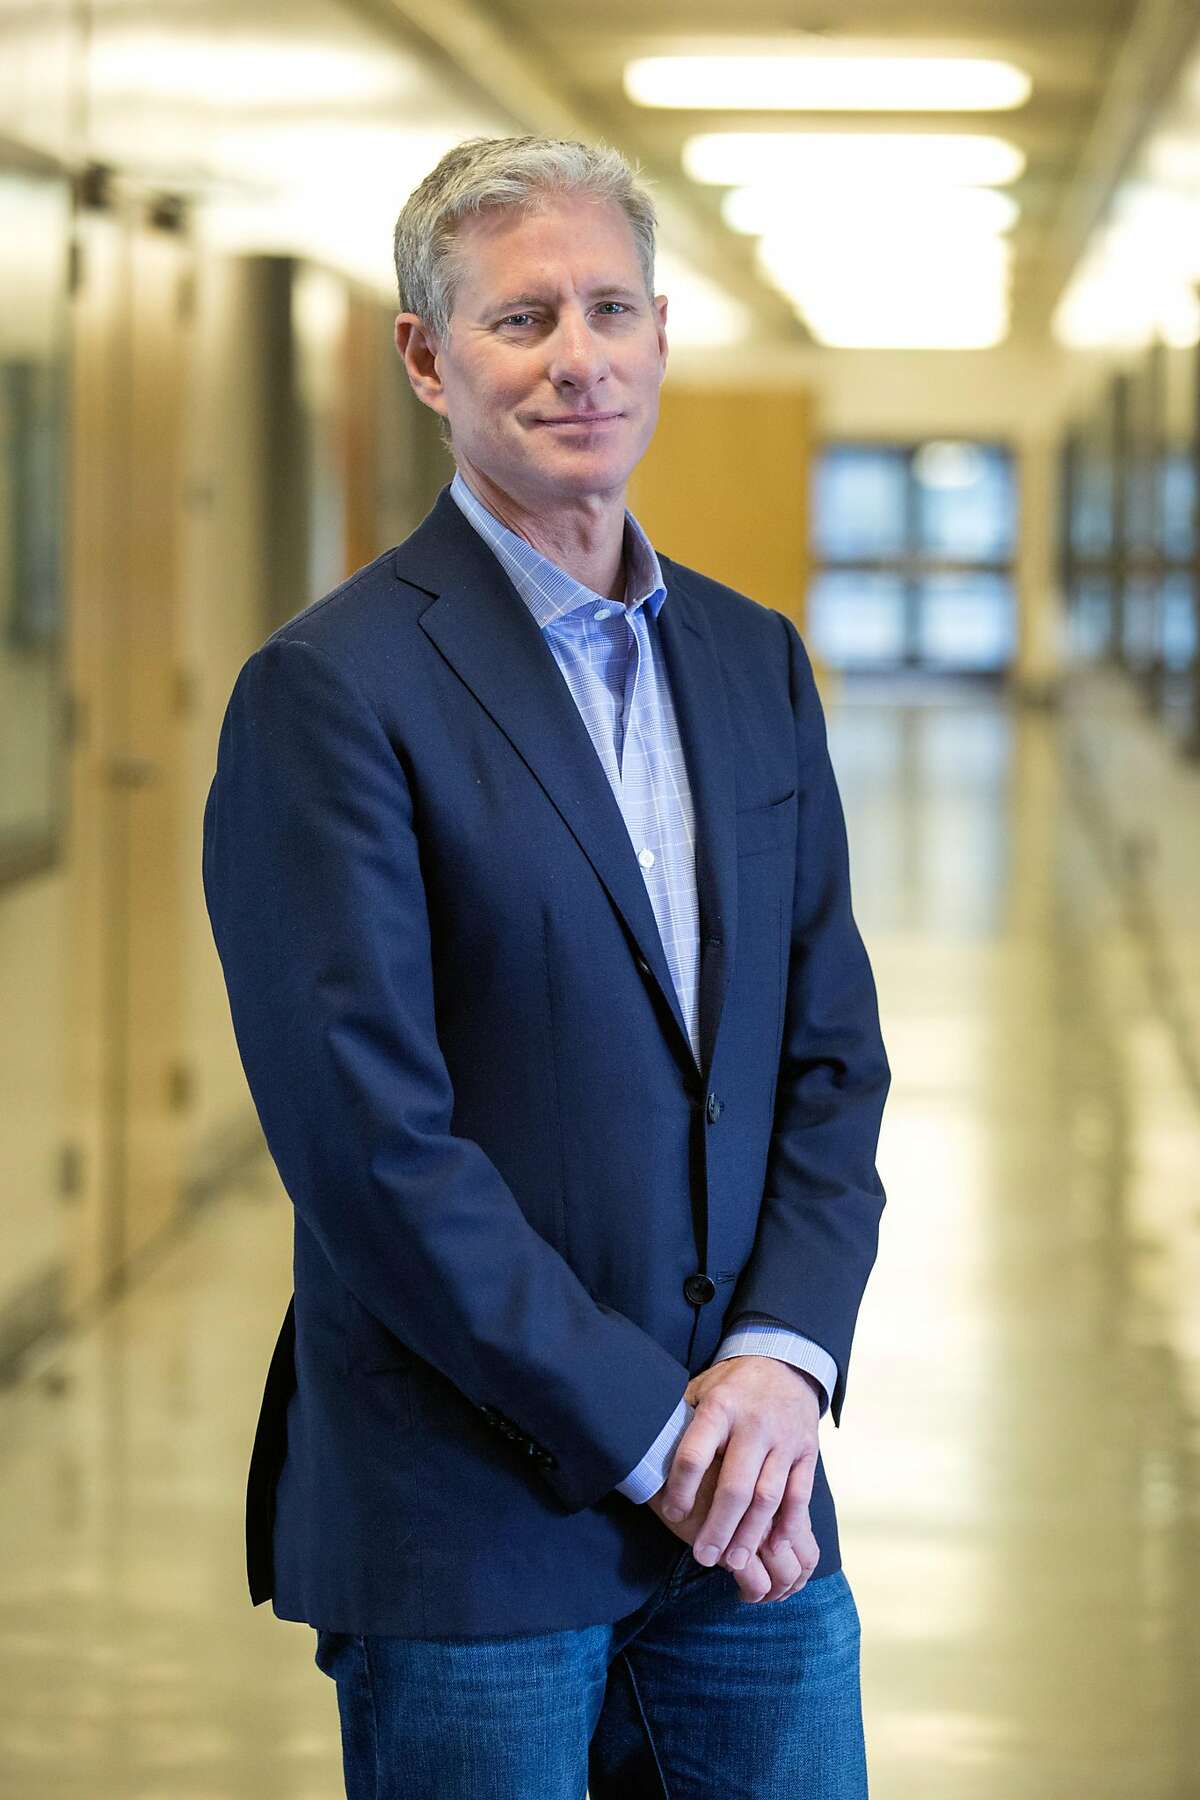 Chris Larsen, business executive and co-founder of the company Ripple Labs, Inc., poses for a portrait on campus of San Francisco State University, his alma mater, on Thursday, April 4, 2019. San Francisco, Calif.